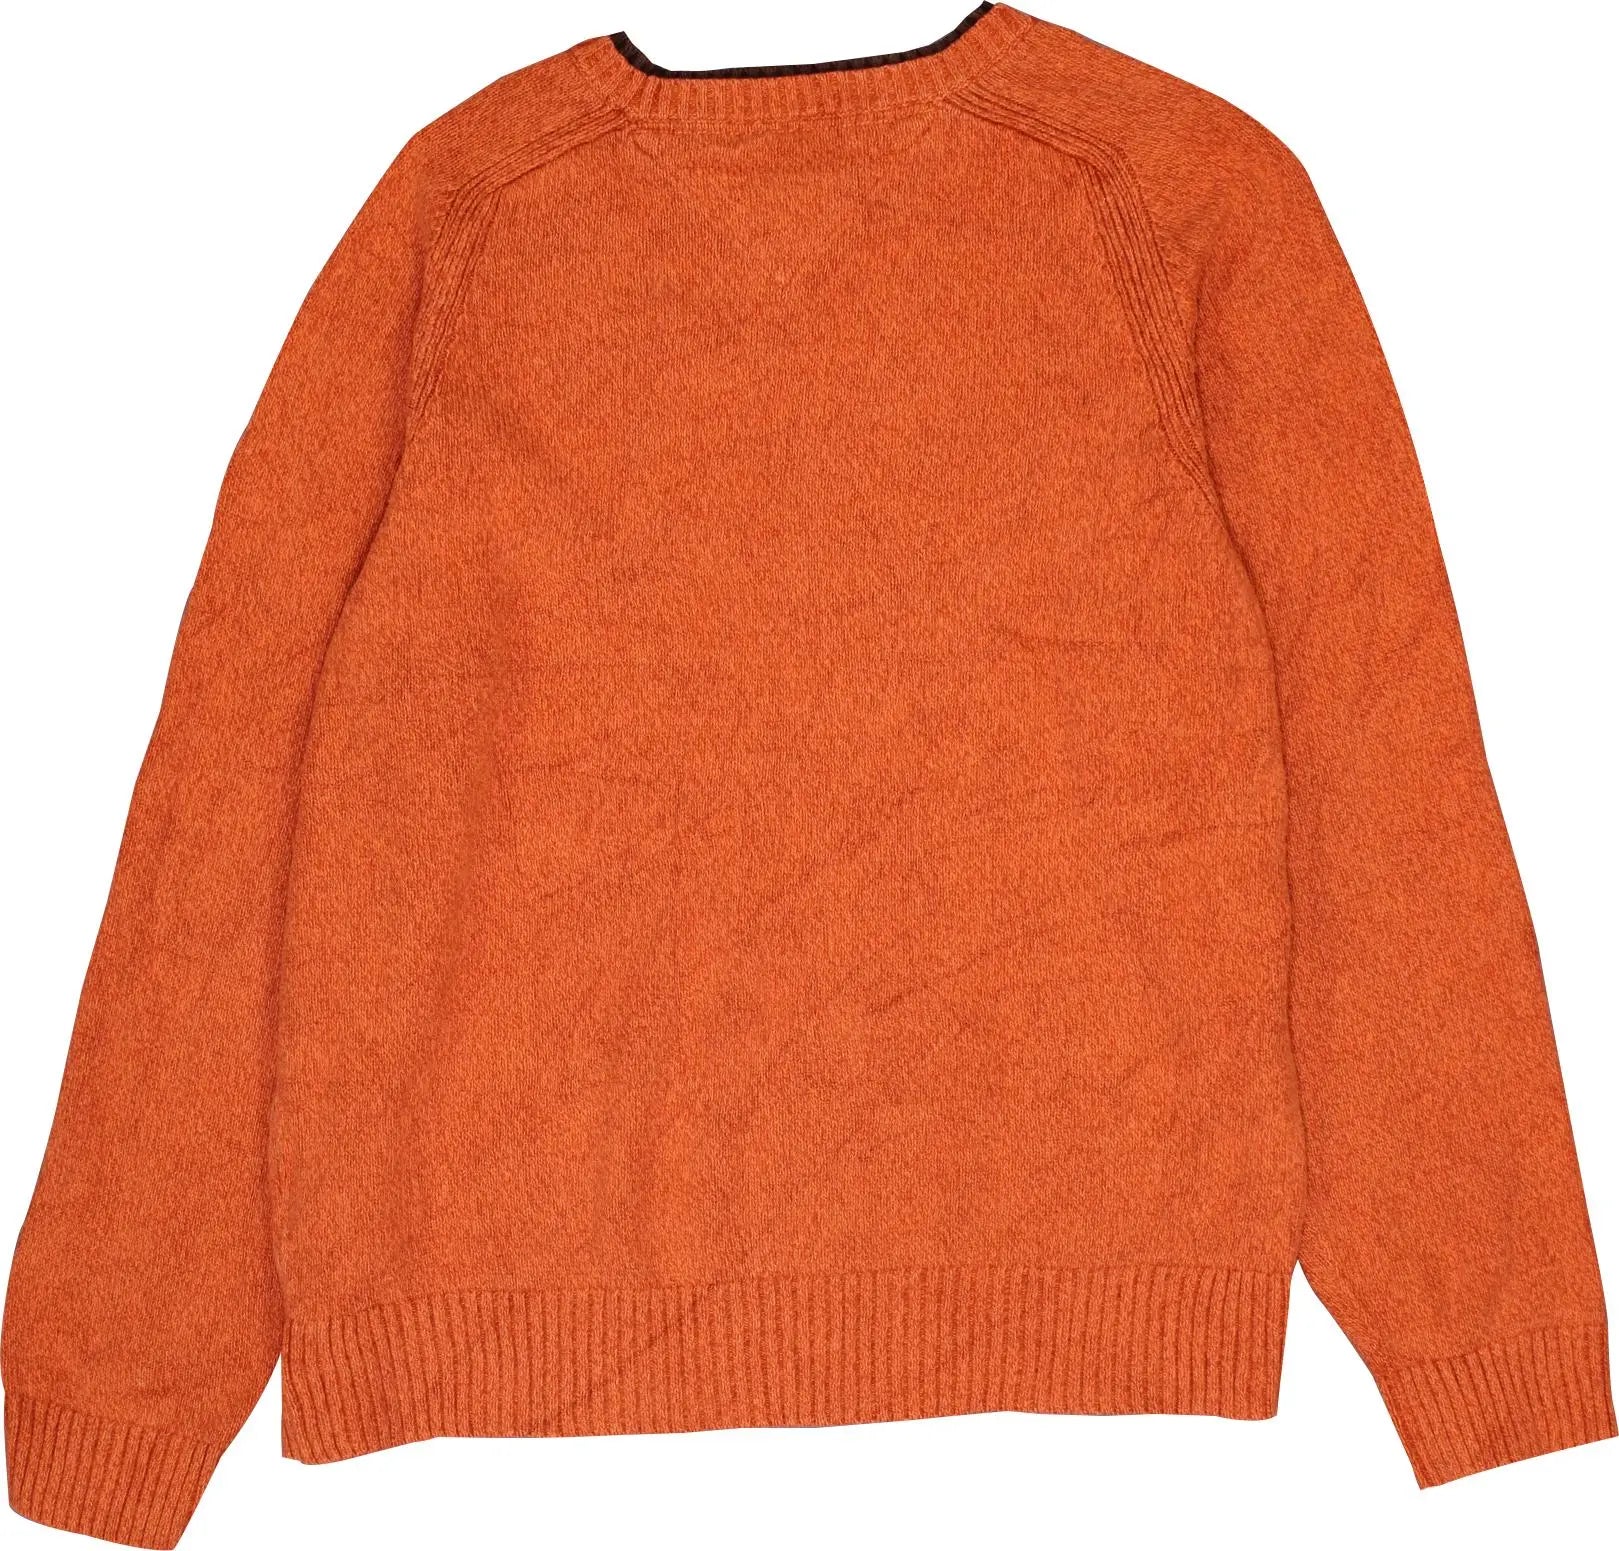 Tommy Hilfiger - Orange Sweater by Tommy Hilfiger- ThriftTale.com - Vintage and second handclothing